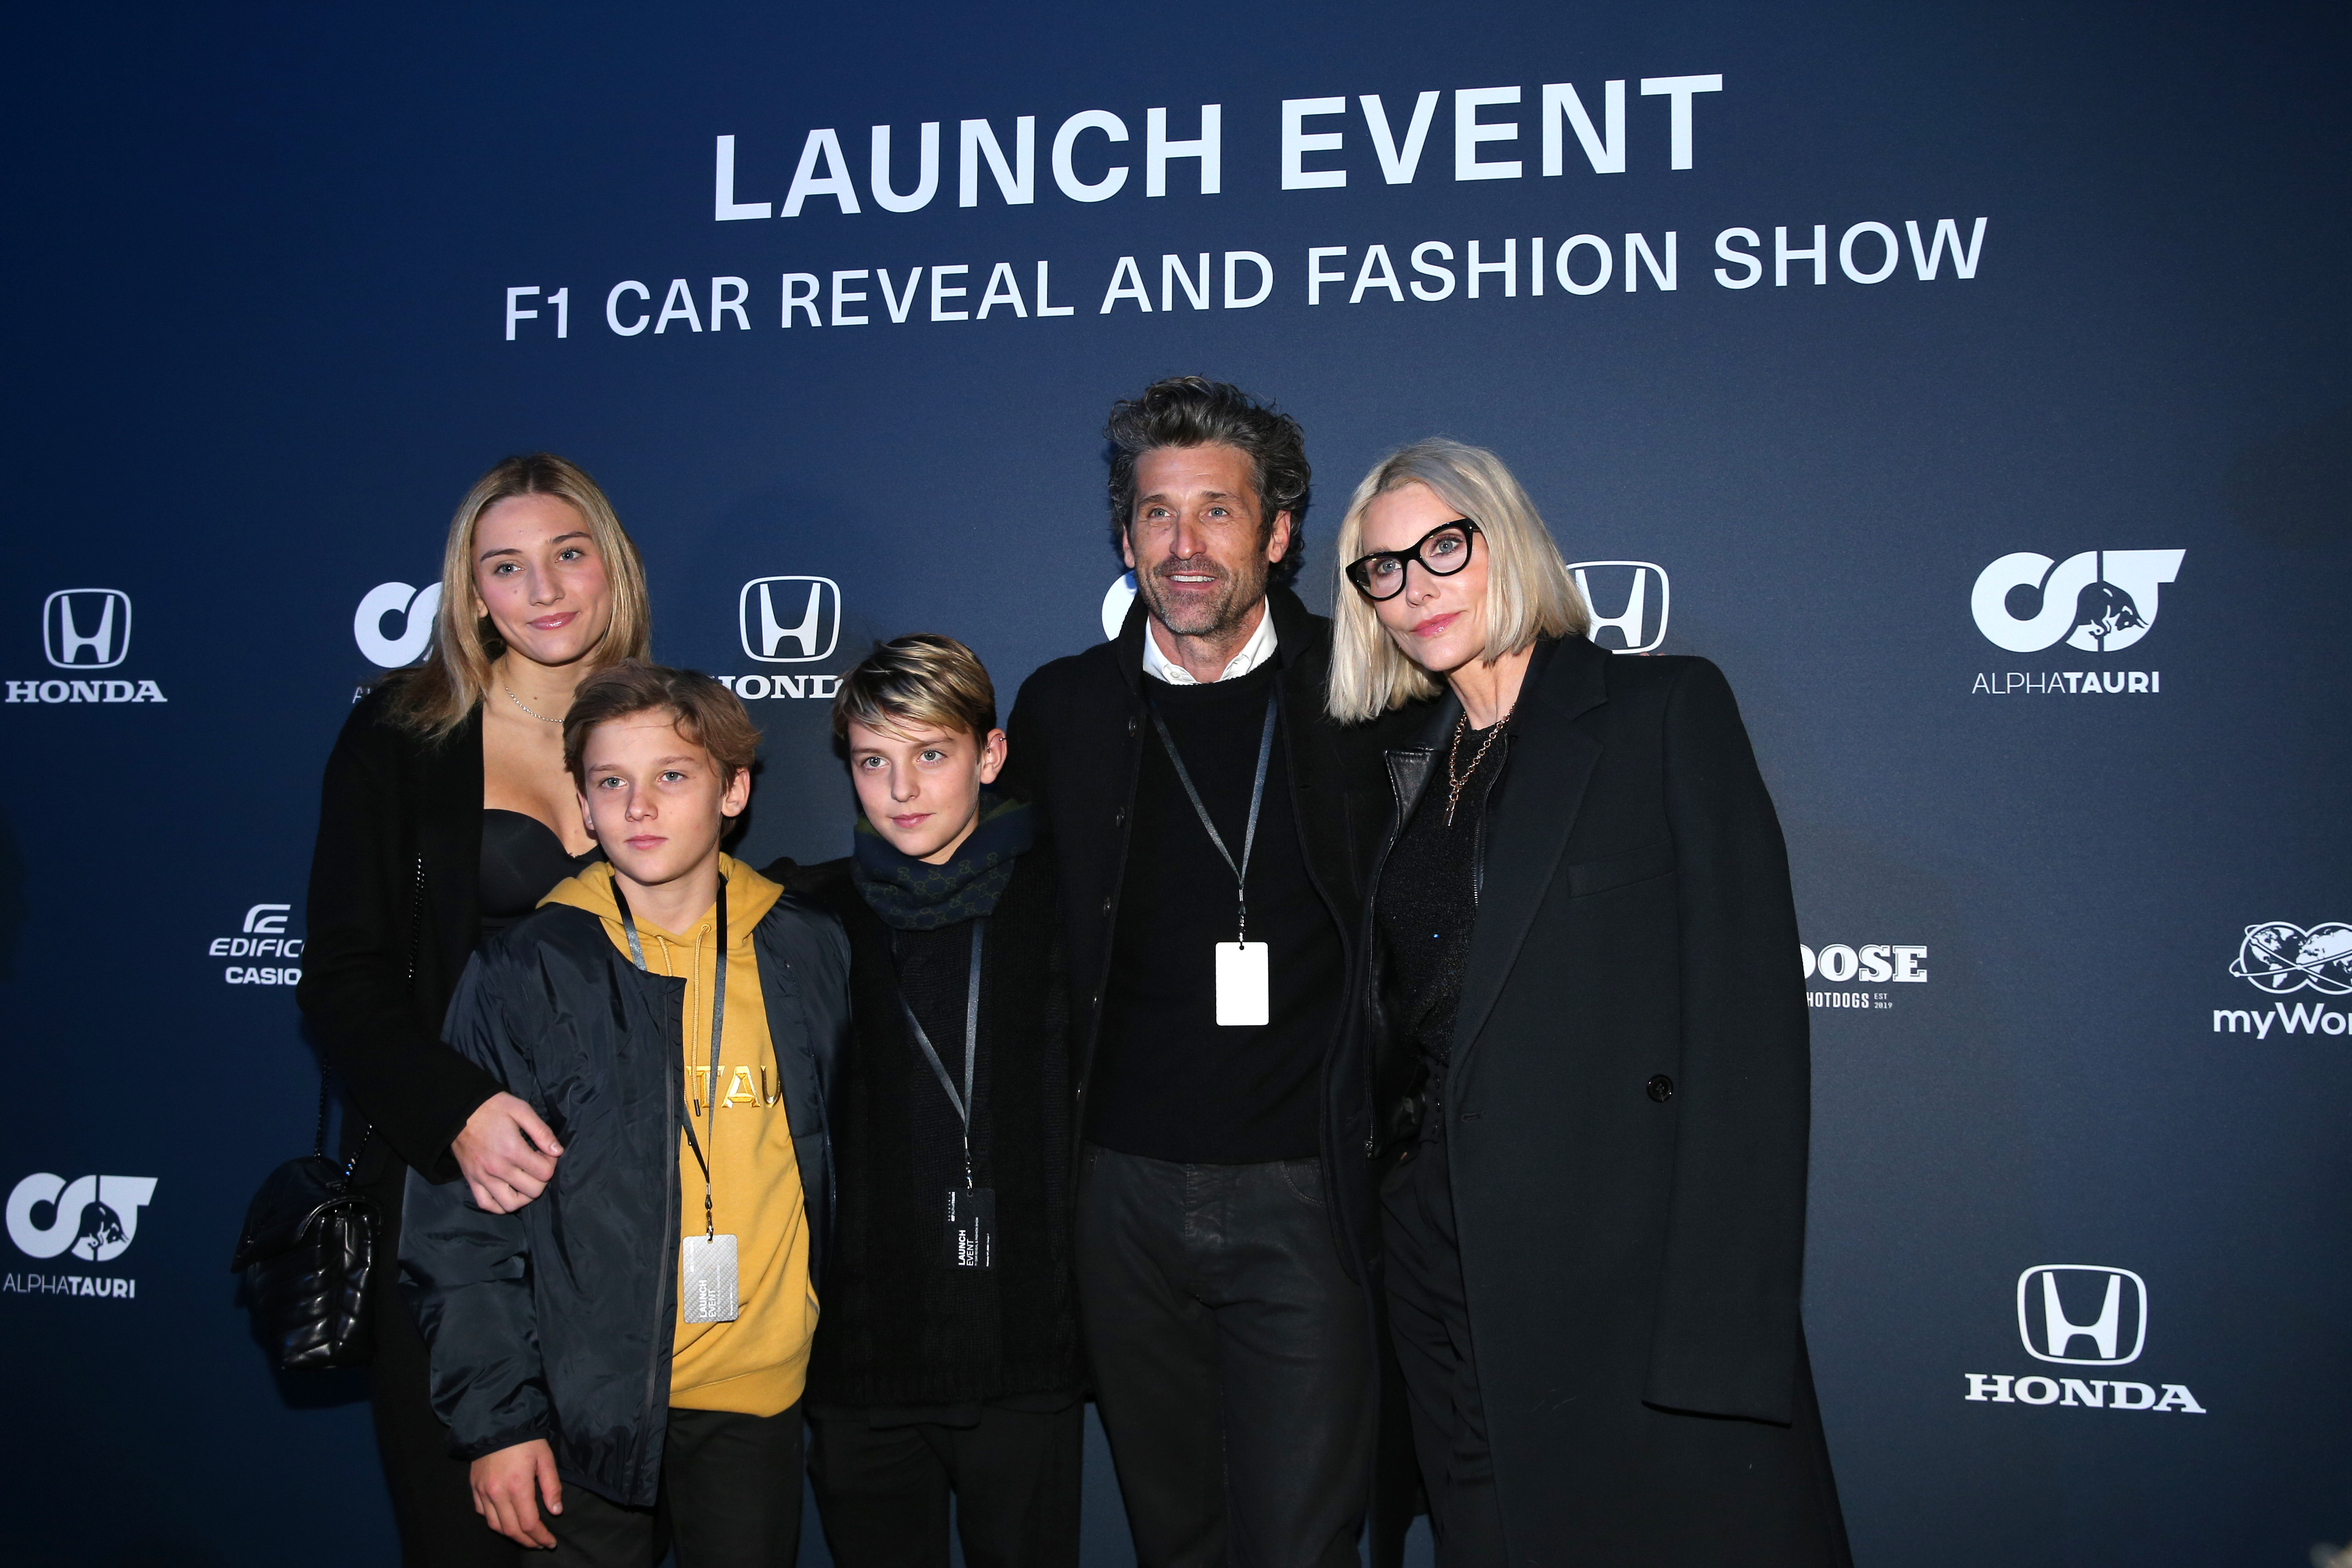 Patrick and Jillian Dempsey with their kids, Talula, Darby, and Sullivan Dempsey at the Scuderia AlphaTauri launch event in Salzburg, Austria on February 14, 2020 | Source: Getty Images